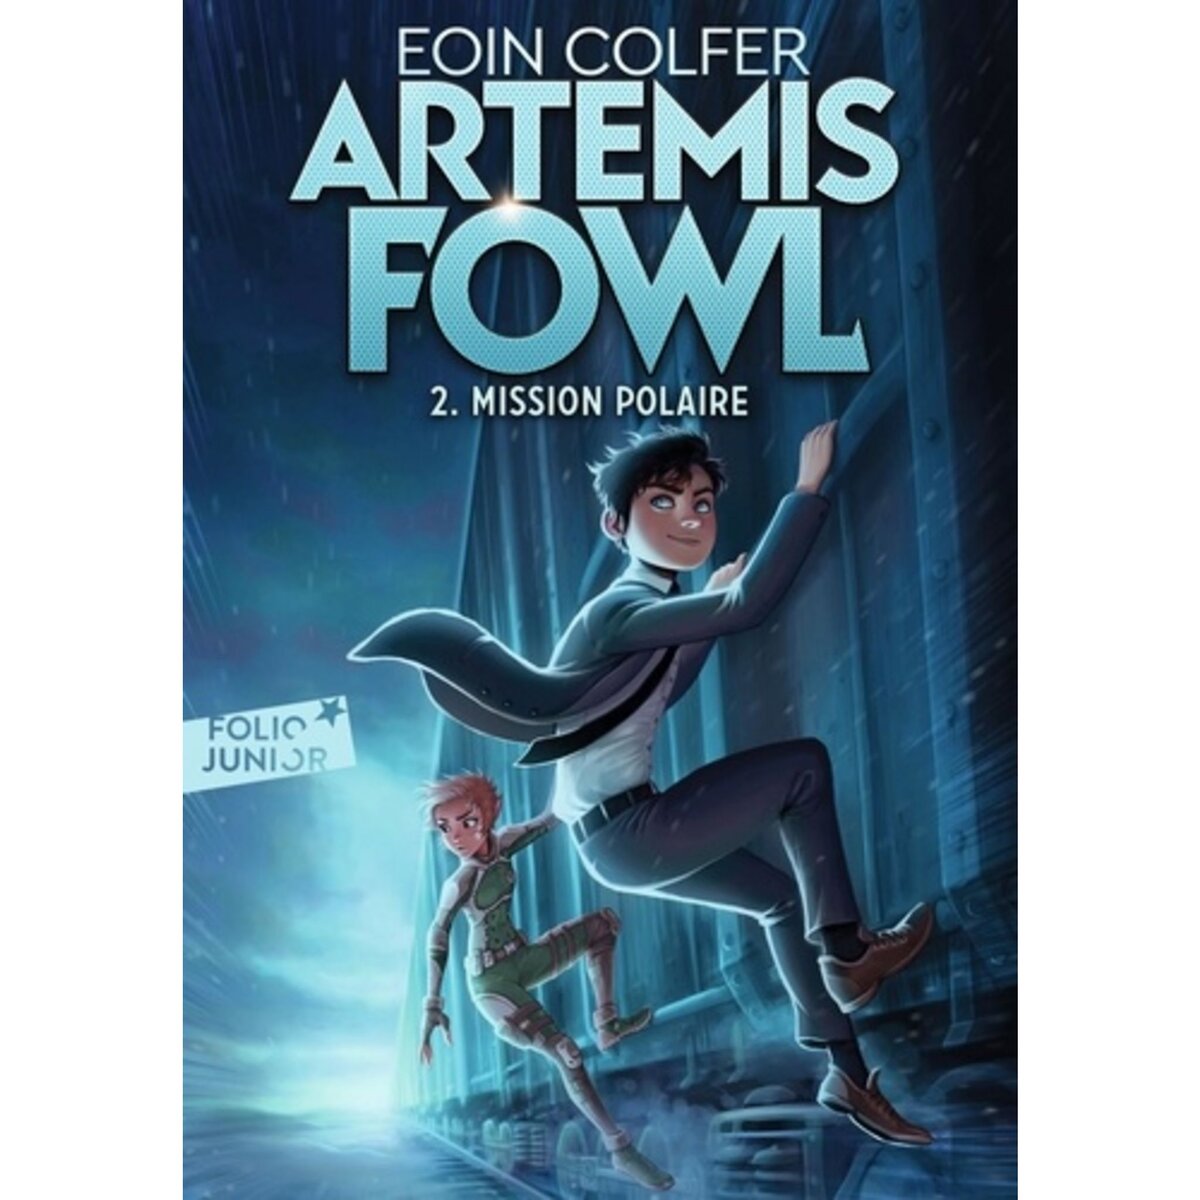  ARTEMIS FOWL TOME 2 : MISSION POLAIRE, Colfer Eoin